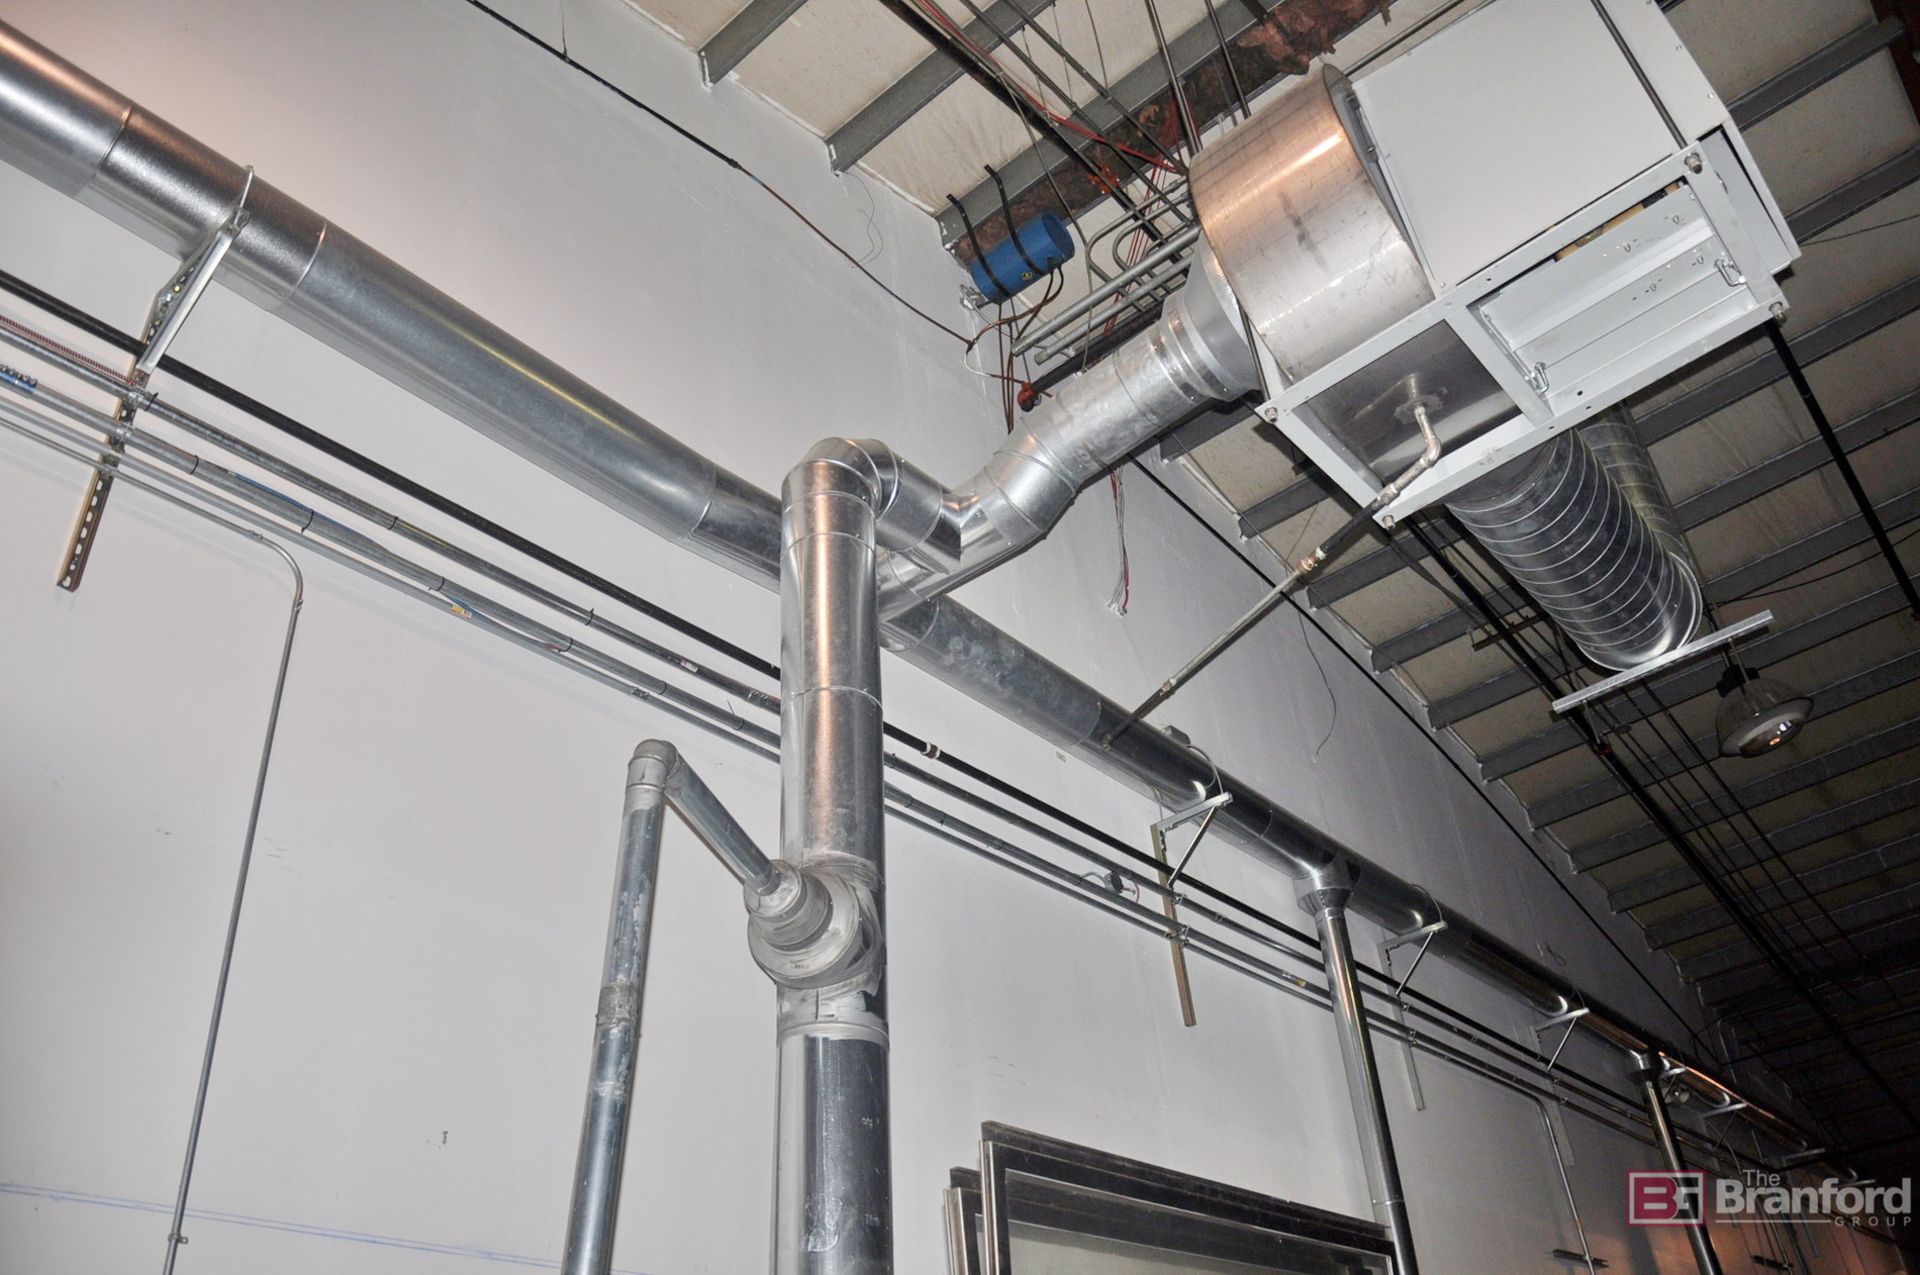 Industrial exhaust system - Image 5 of 13